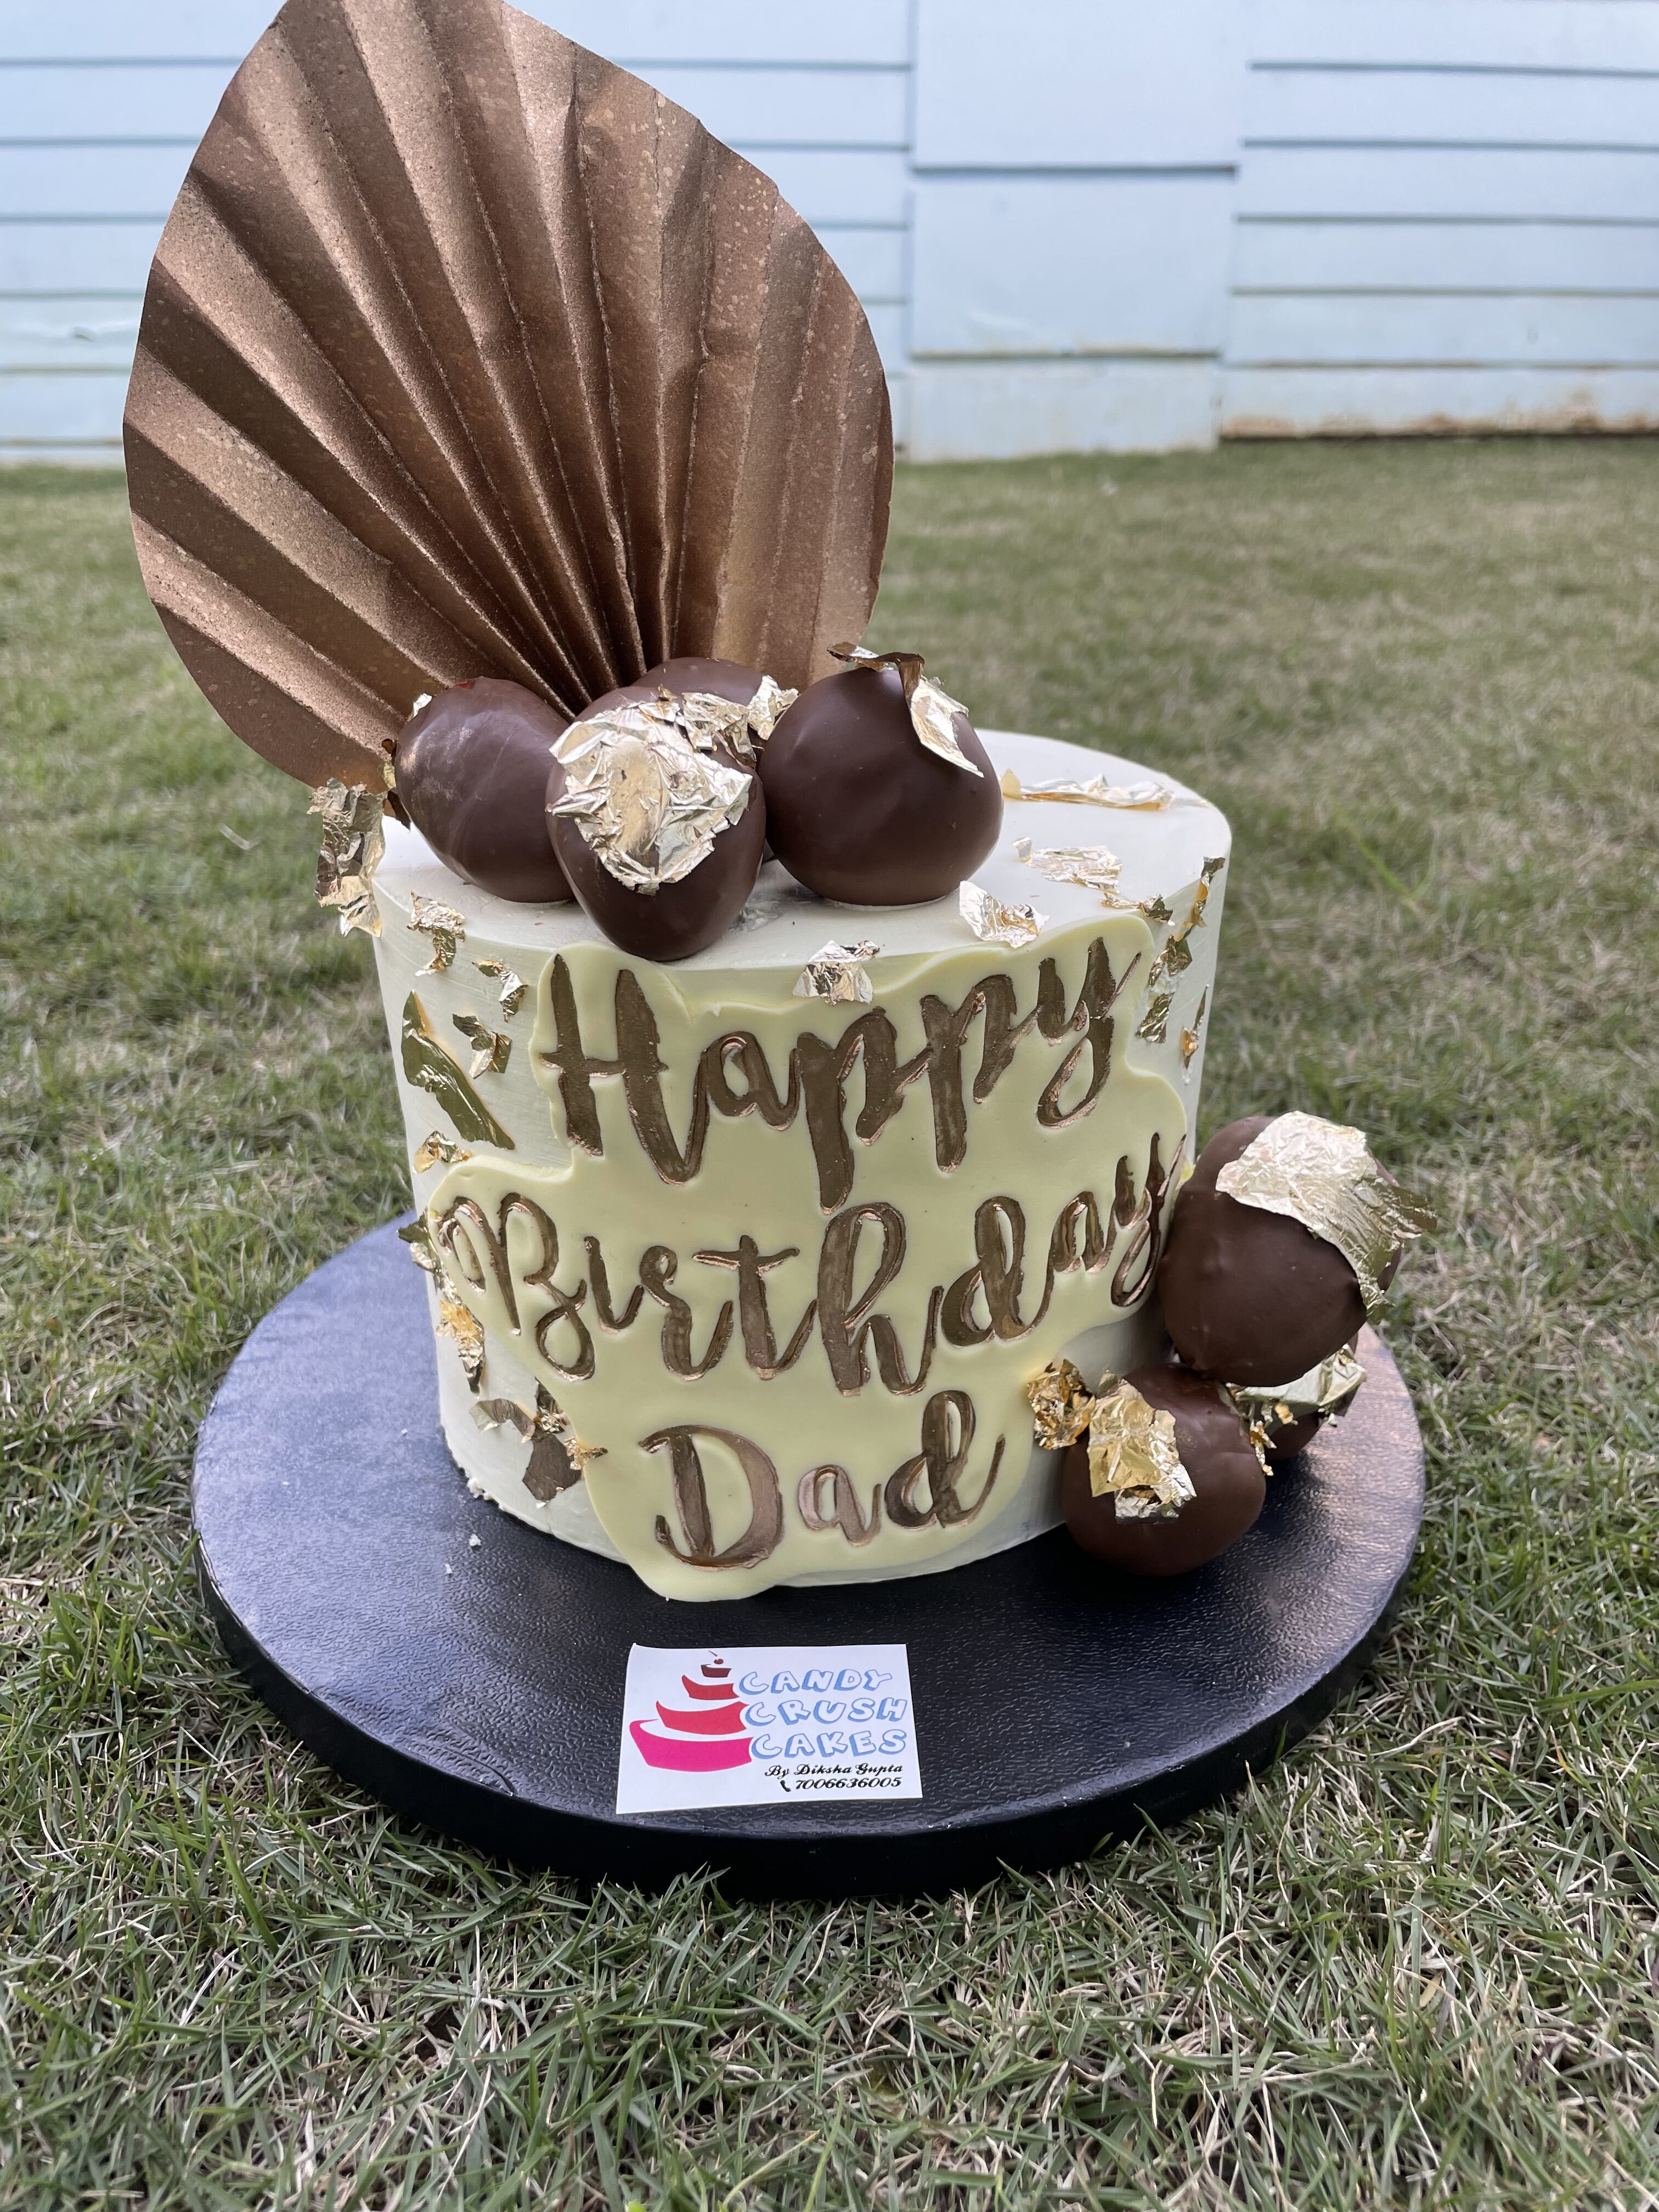 Perfect Party Cake for Dad's 70th Birthday | On to the plate